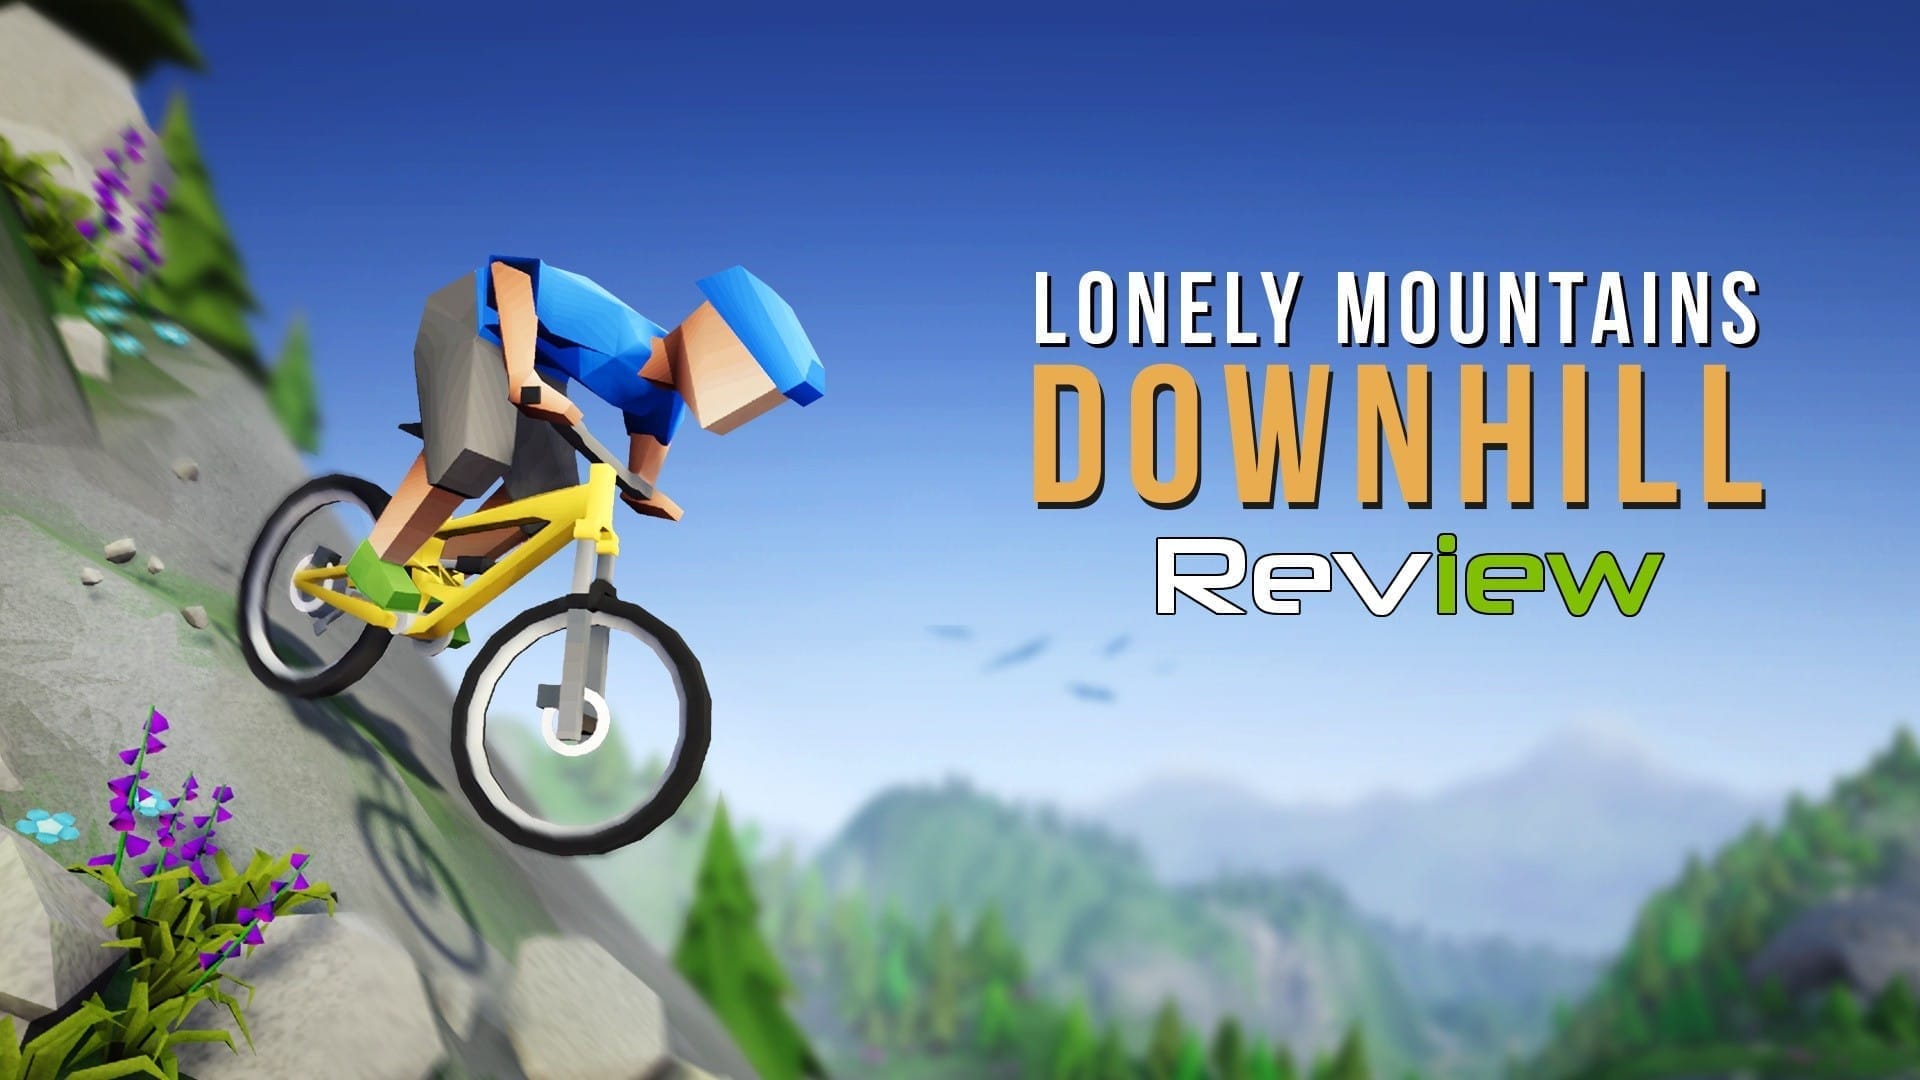 Lonely Mountains Downhill Wallpapers